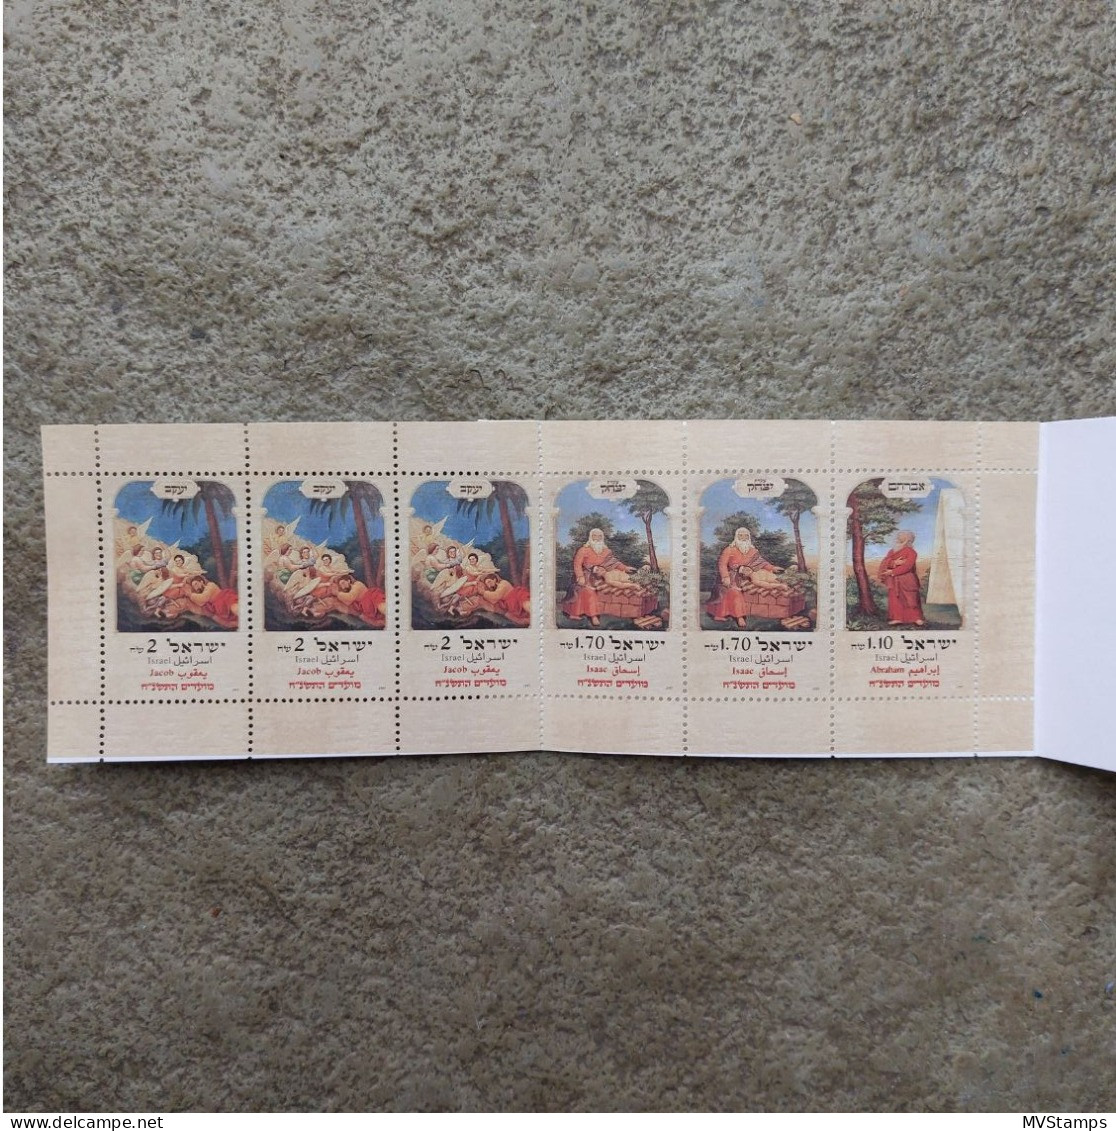 Israel 1997 Booklet Festival Stamps (Michel MH 31) Nice MNH - Booklets